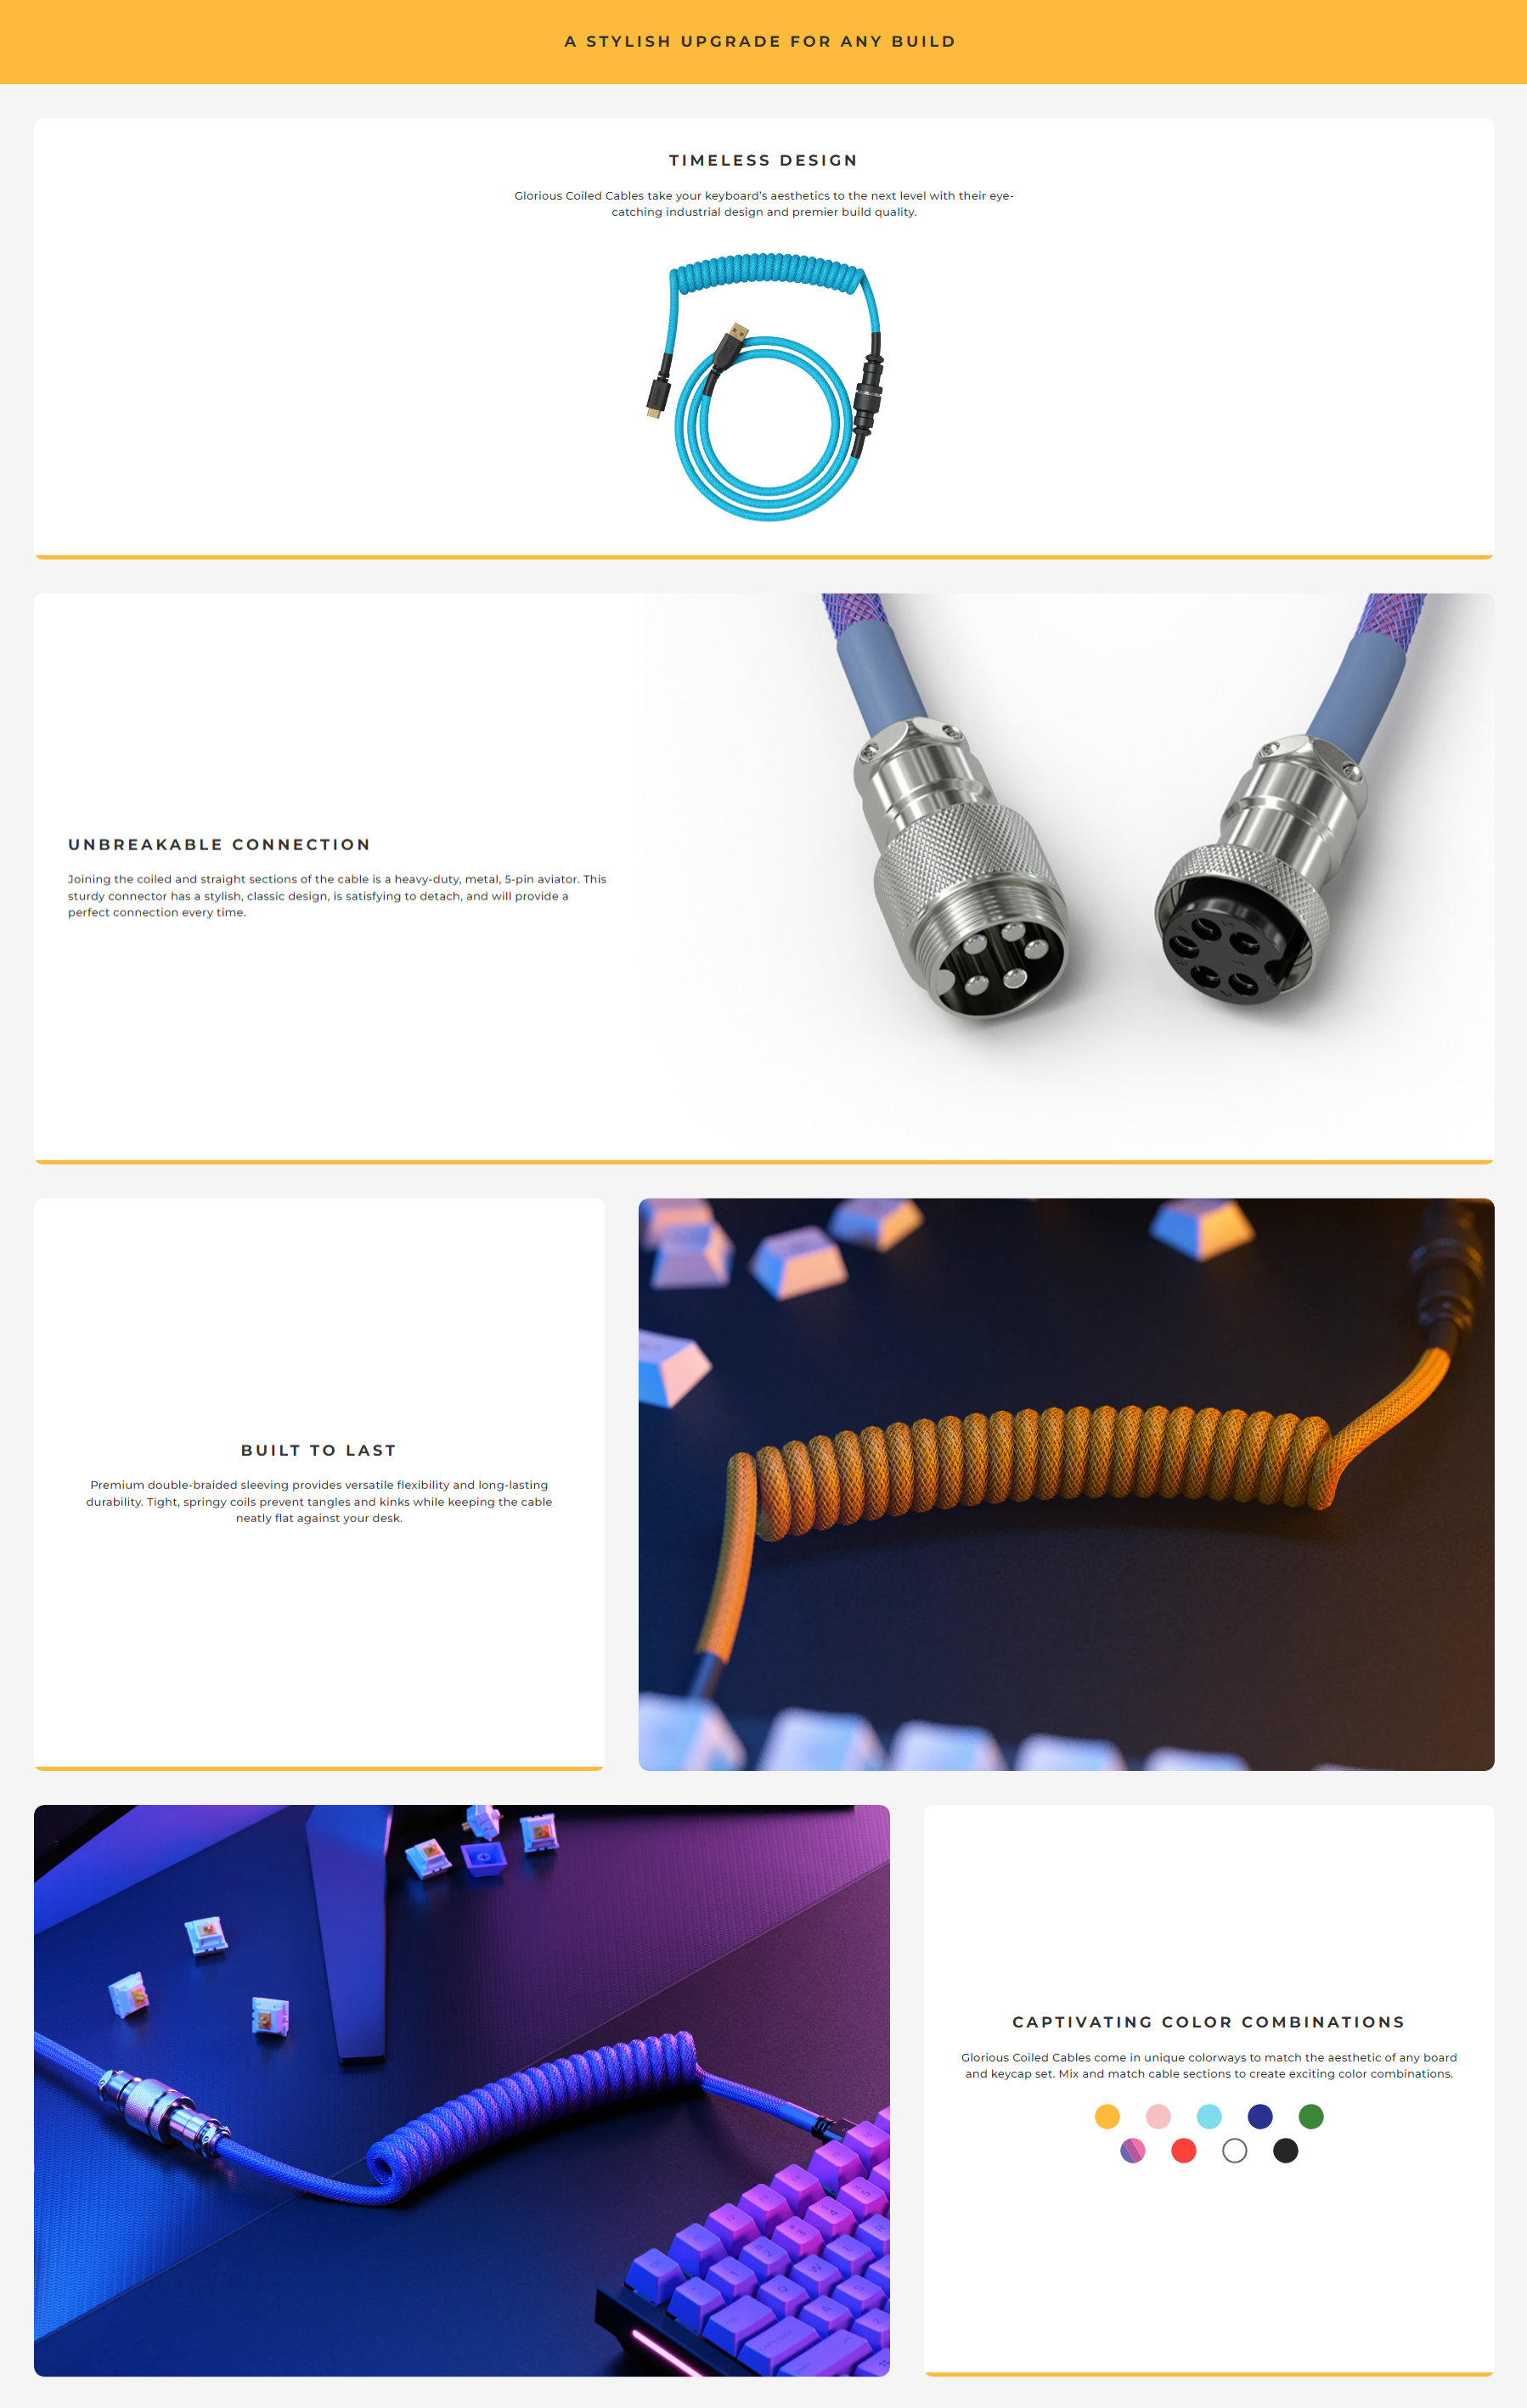 A large marketing image providing additional information about the product Glorious Coiled USB-C Keyboard Cable - Electric Blue - Additional alt info not provided